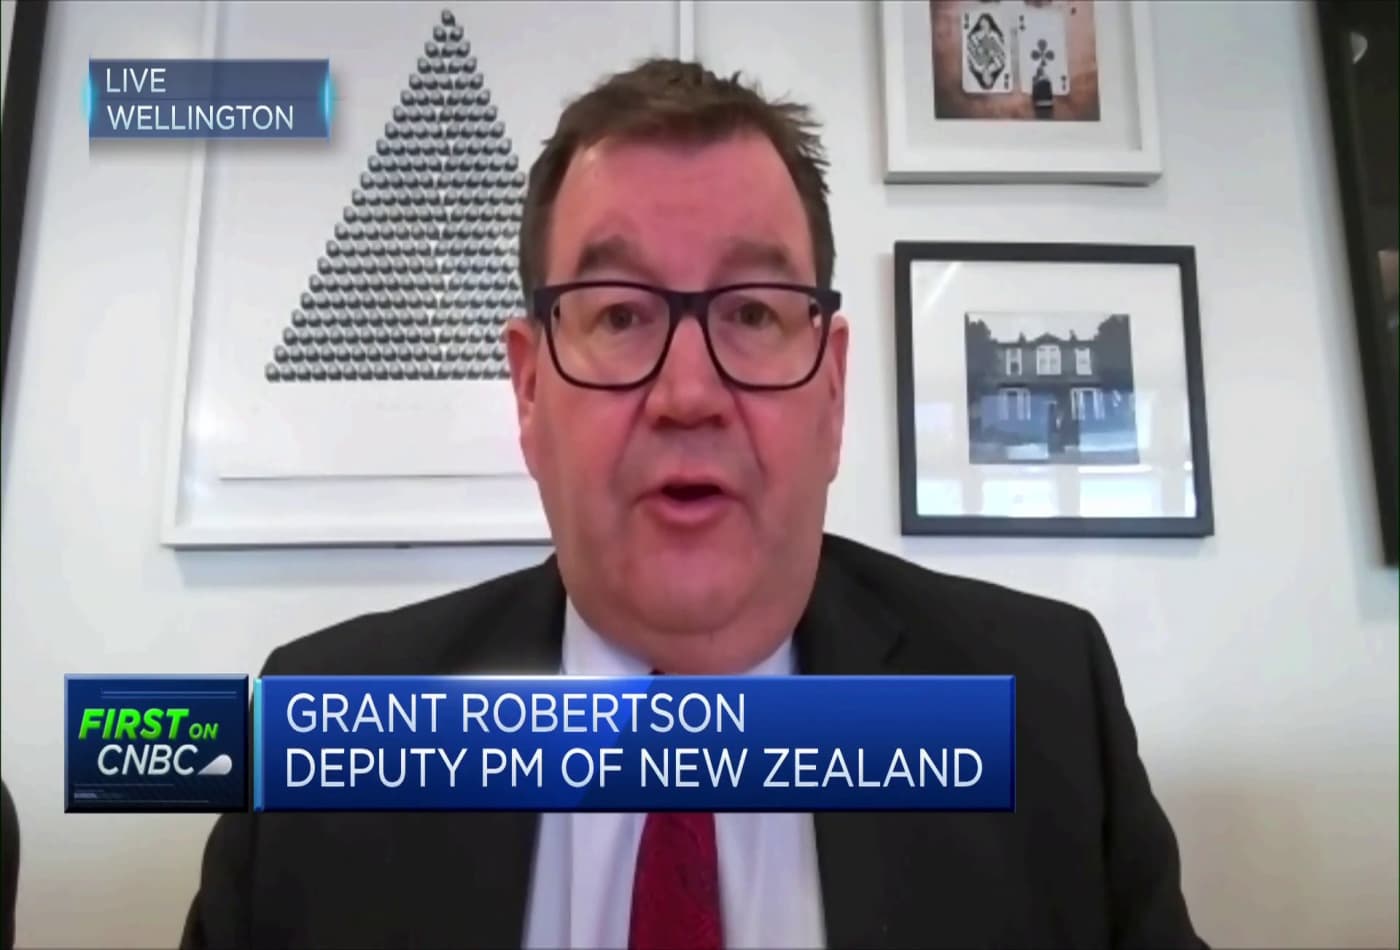 New Zealand's deputy prime minister says he's cautiously optimistic on the economy